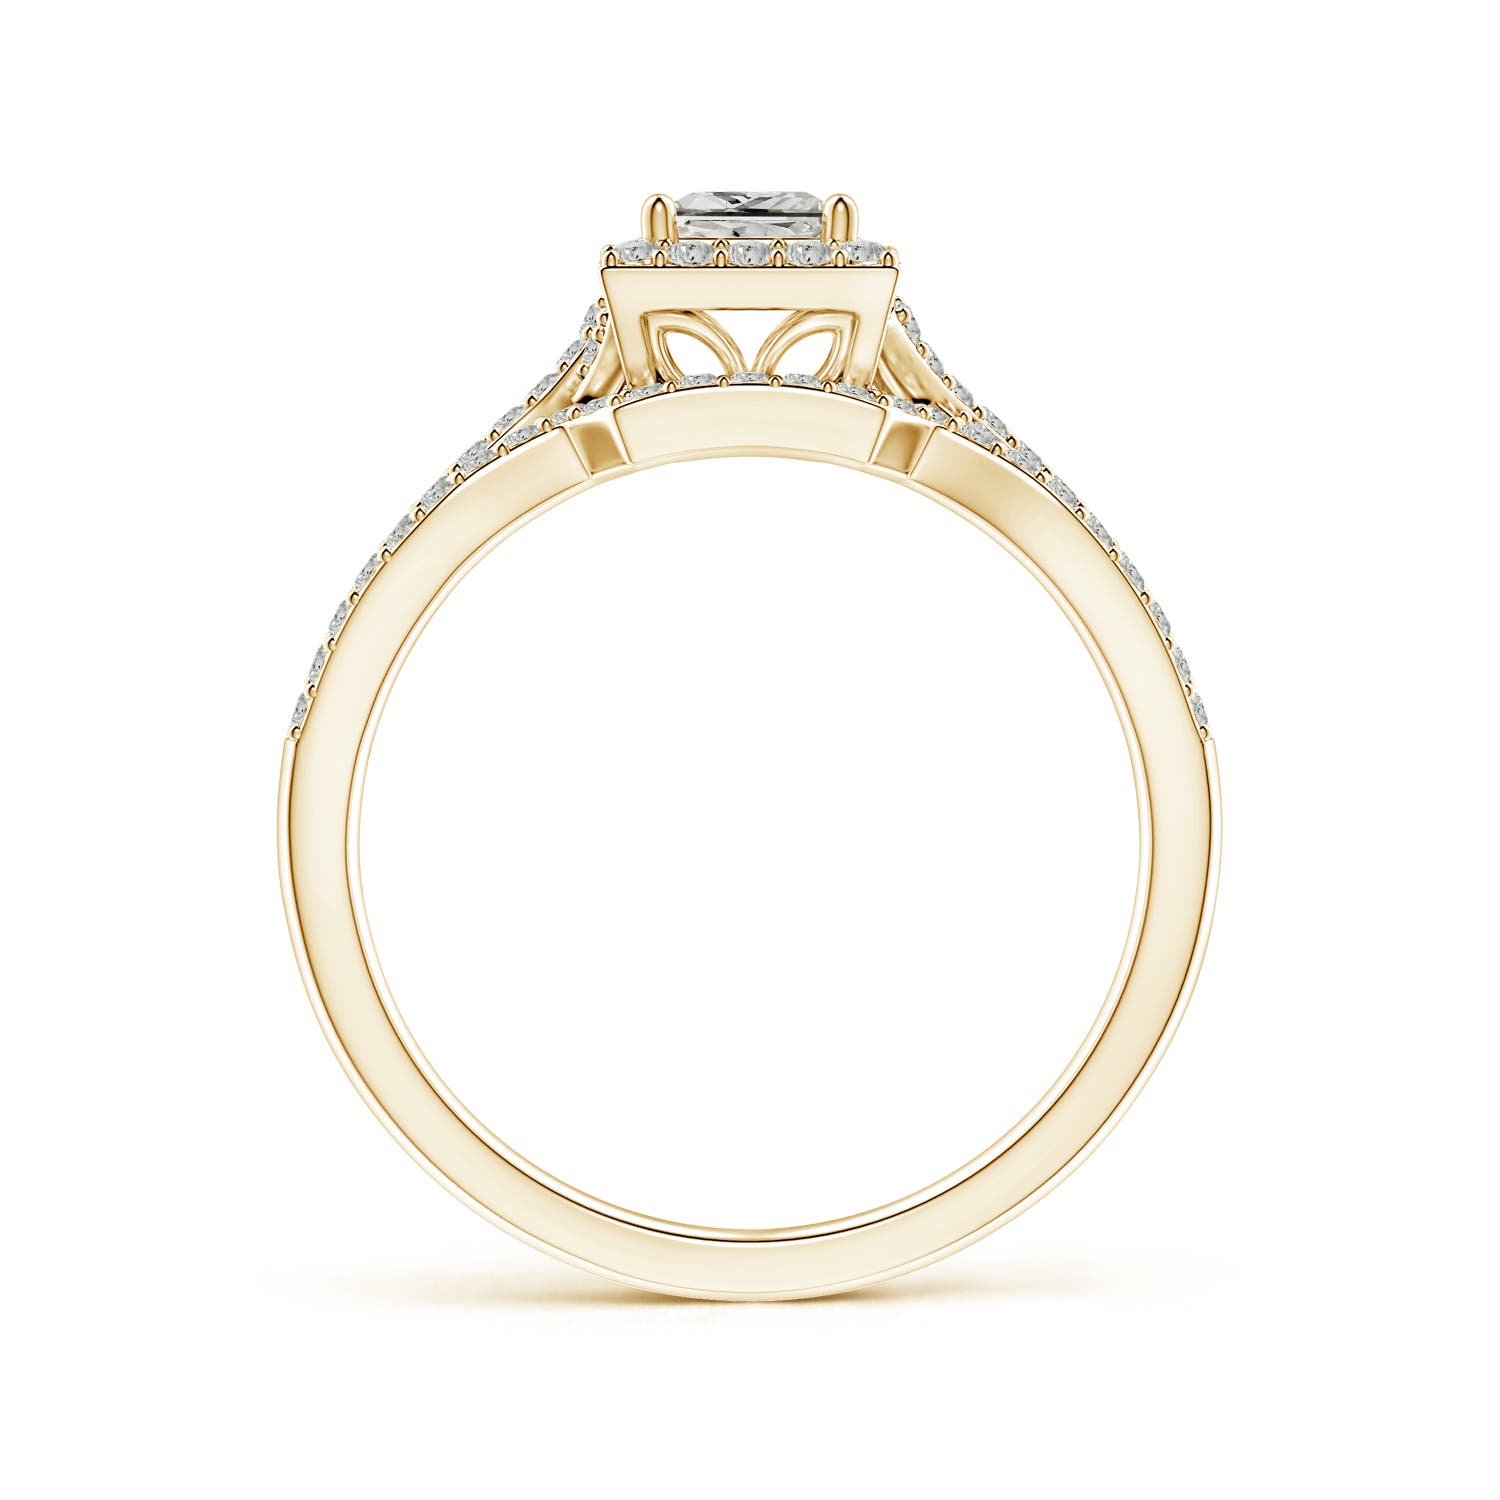 K, I3 / 1.01 CT / 14 KT Yellow Gold